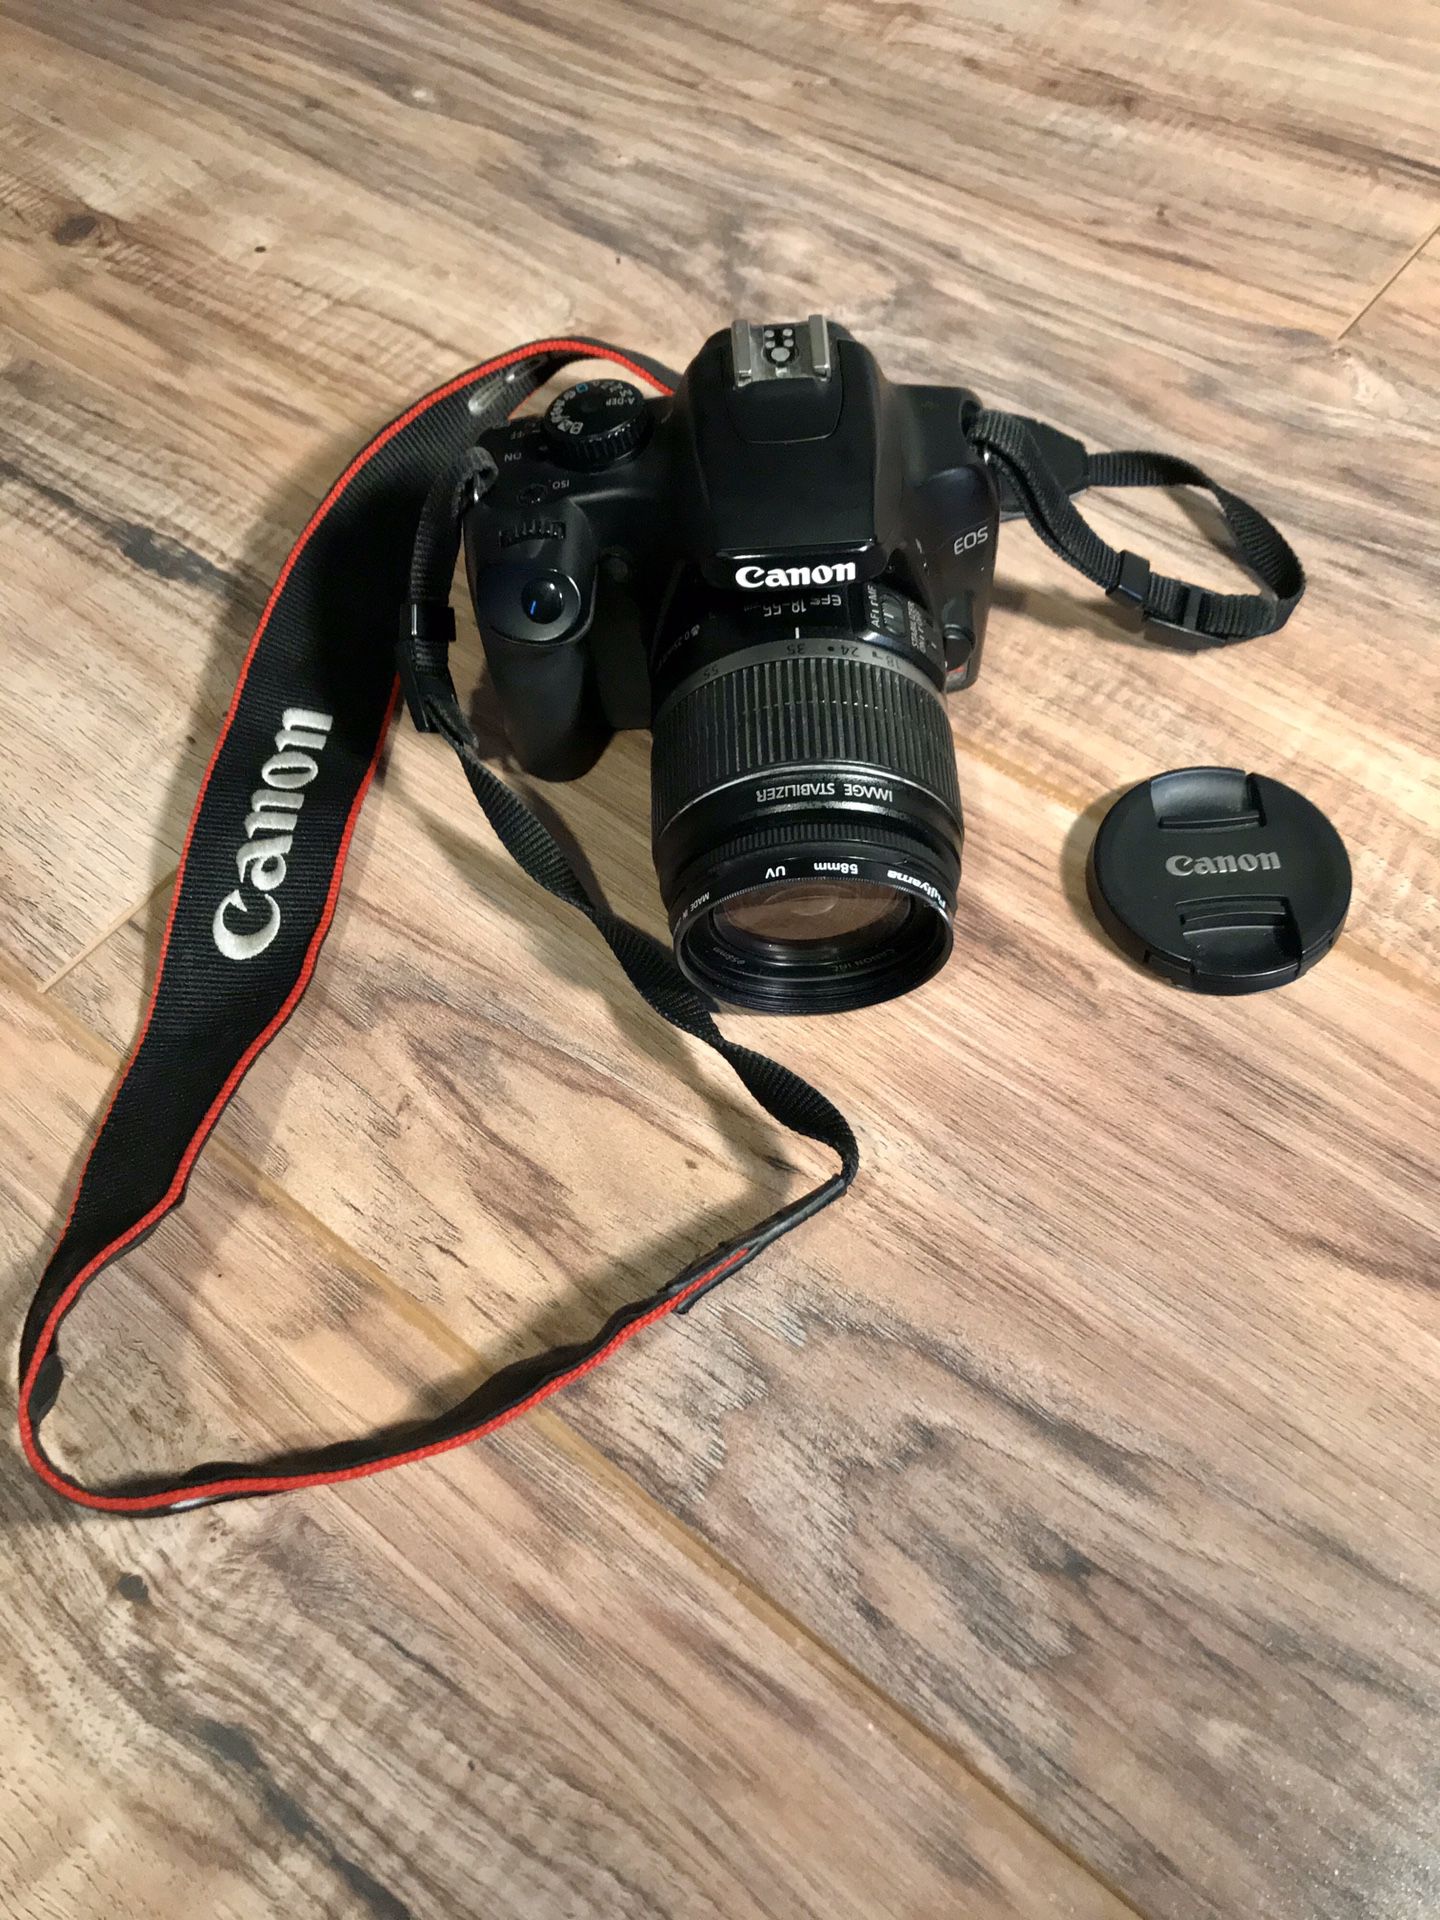 Canon Rebel XS DSLR Camera with EF-S 18-55mm f/3.5-5.6 IS Lens